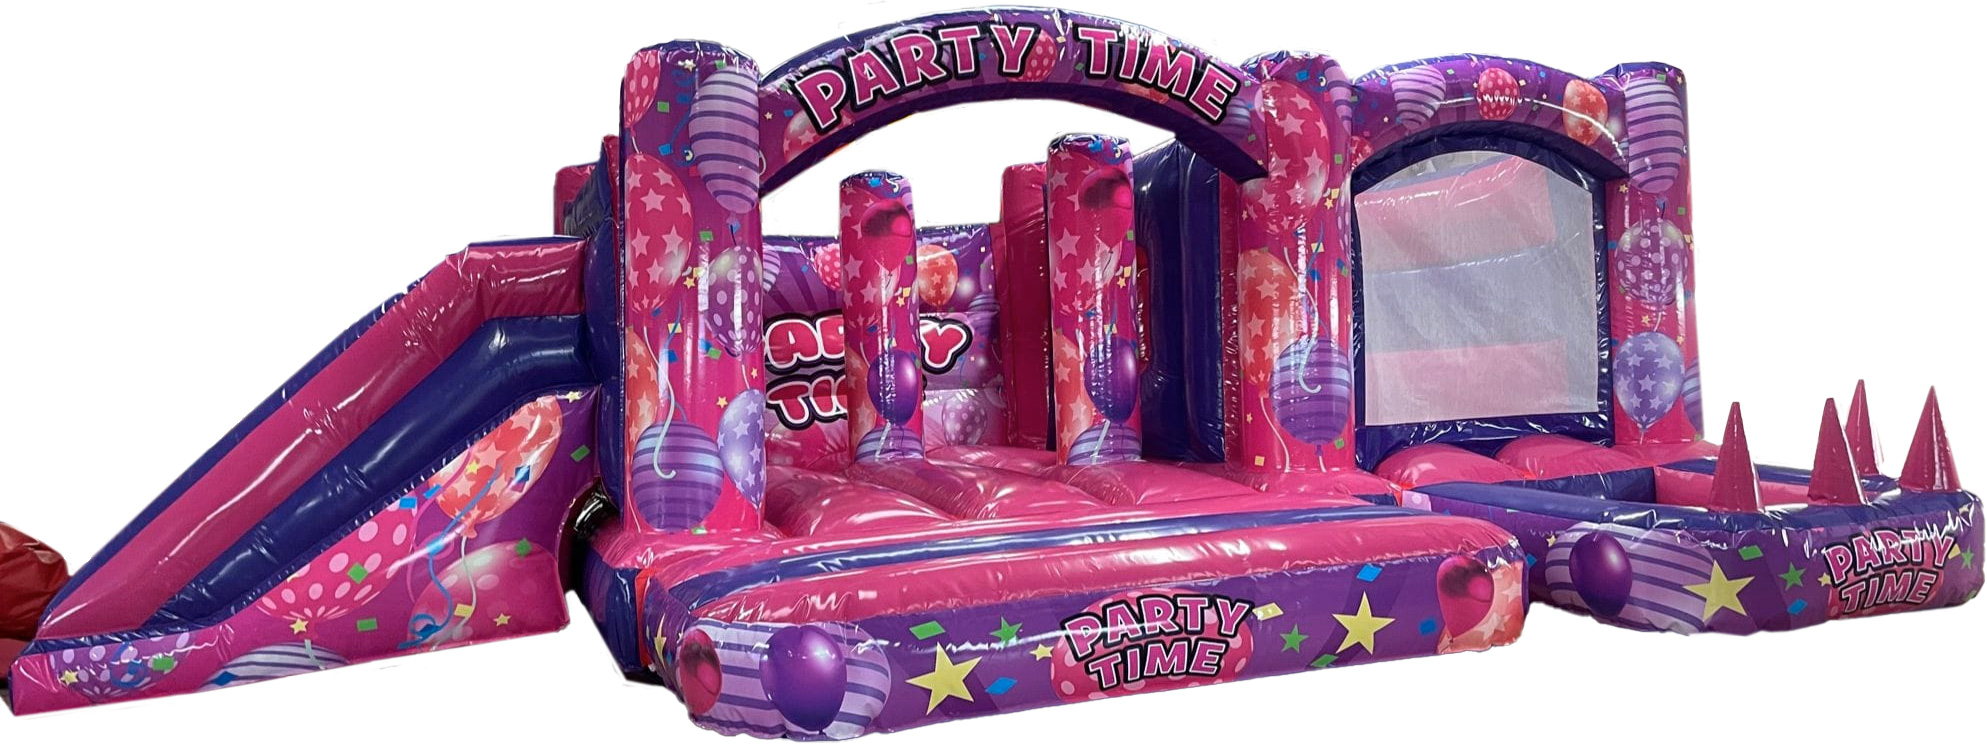 Bouncy Castle Sales - BC696 - Bouncy Inflatable for sale